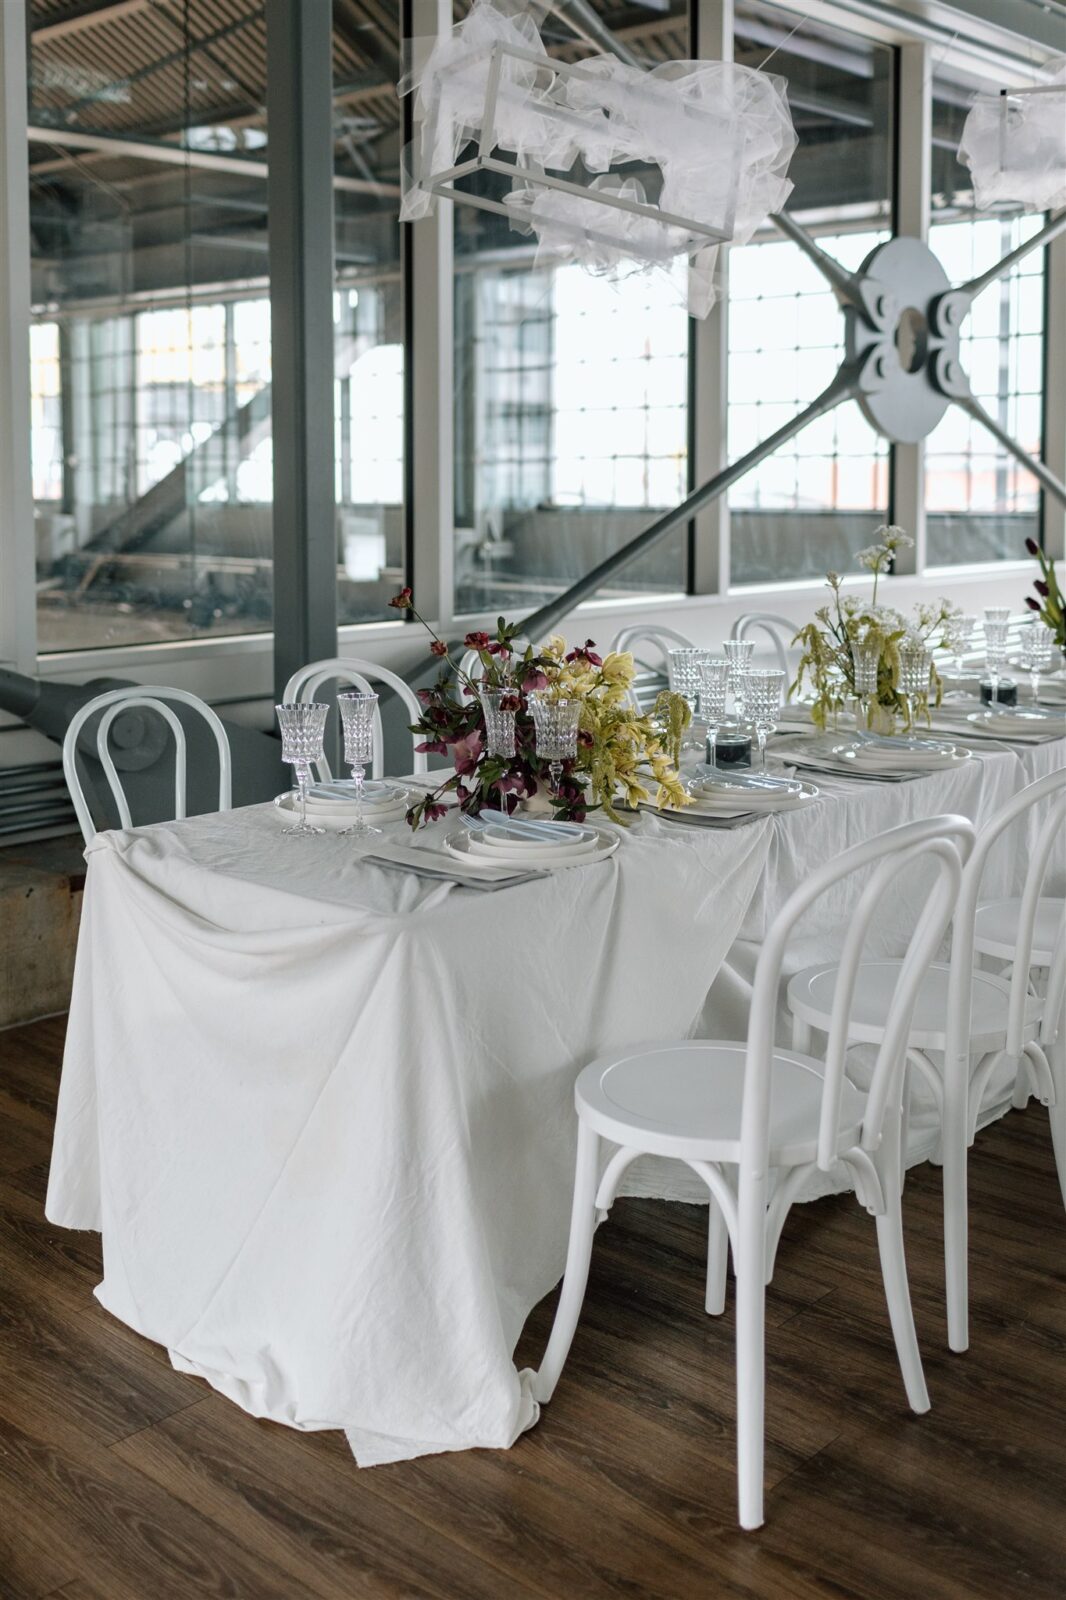 Industrial chic wedding reception at The Wallace Venue in Vancouver, BC. Sleek lines, textural accents, and high-end aesthetic. Contemporary wedding inspiration.